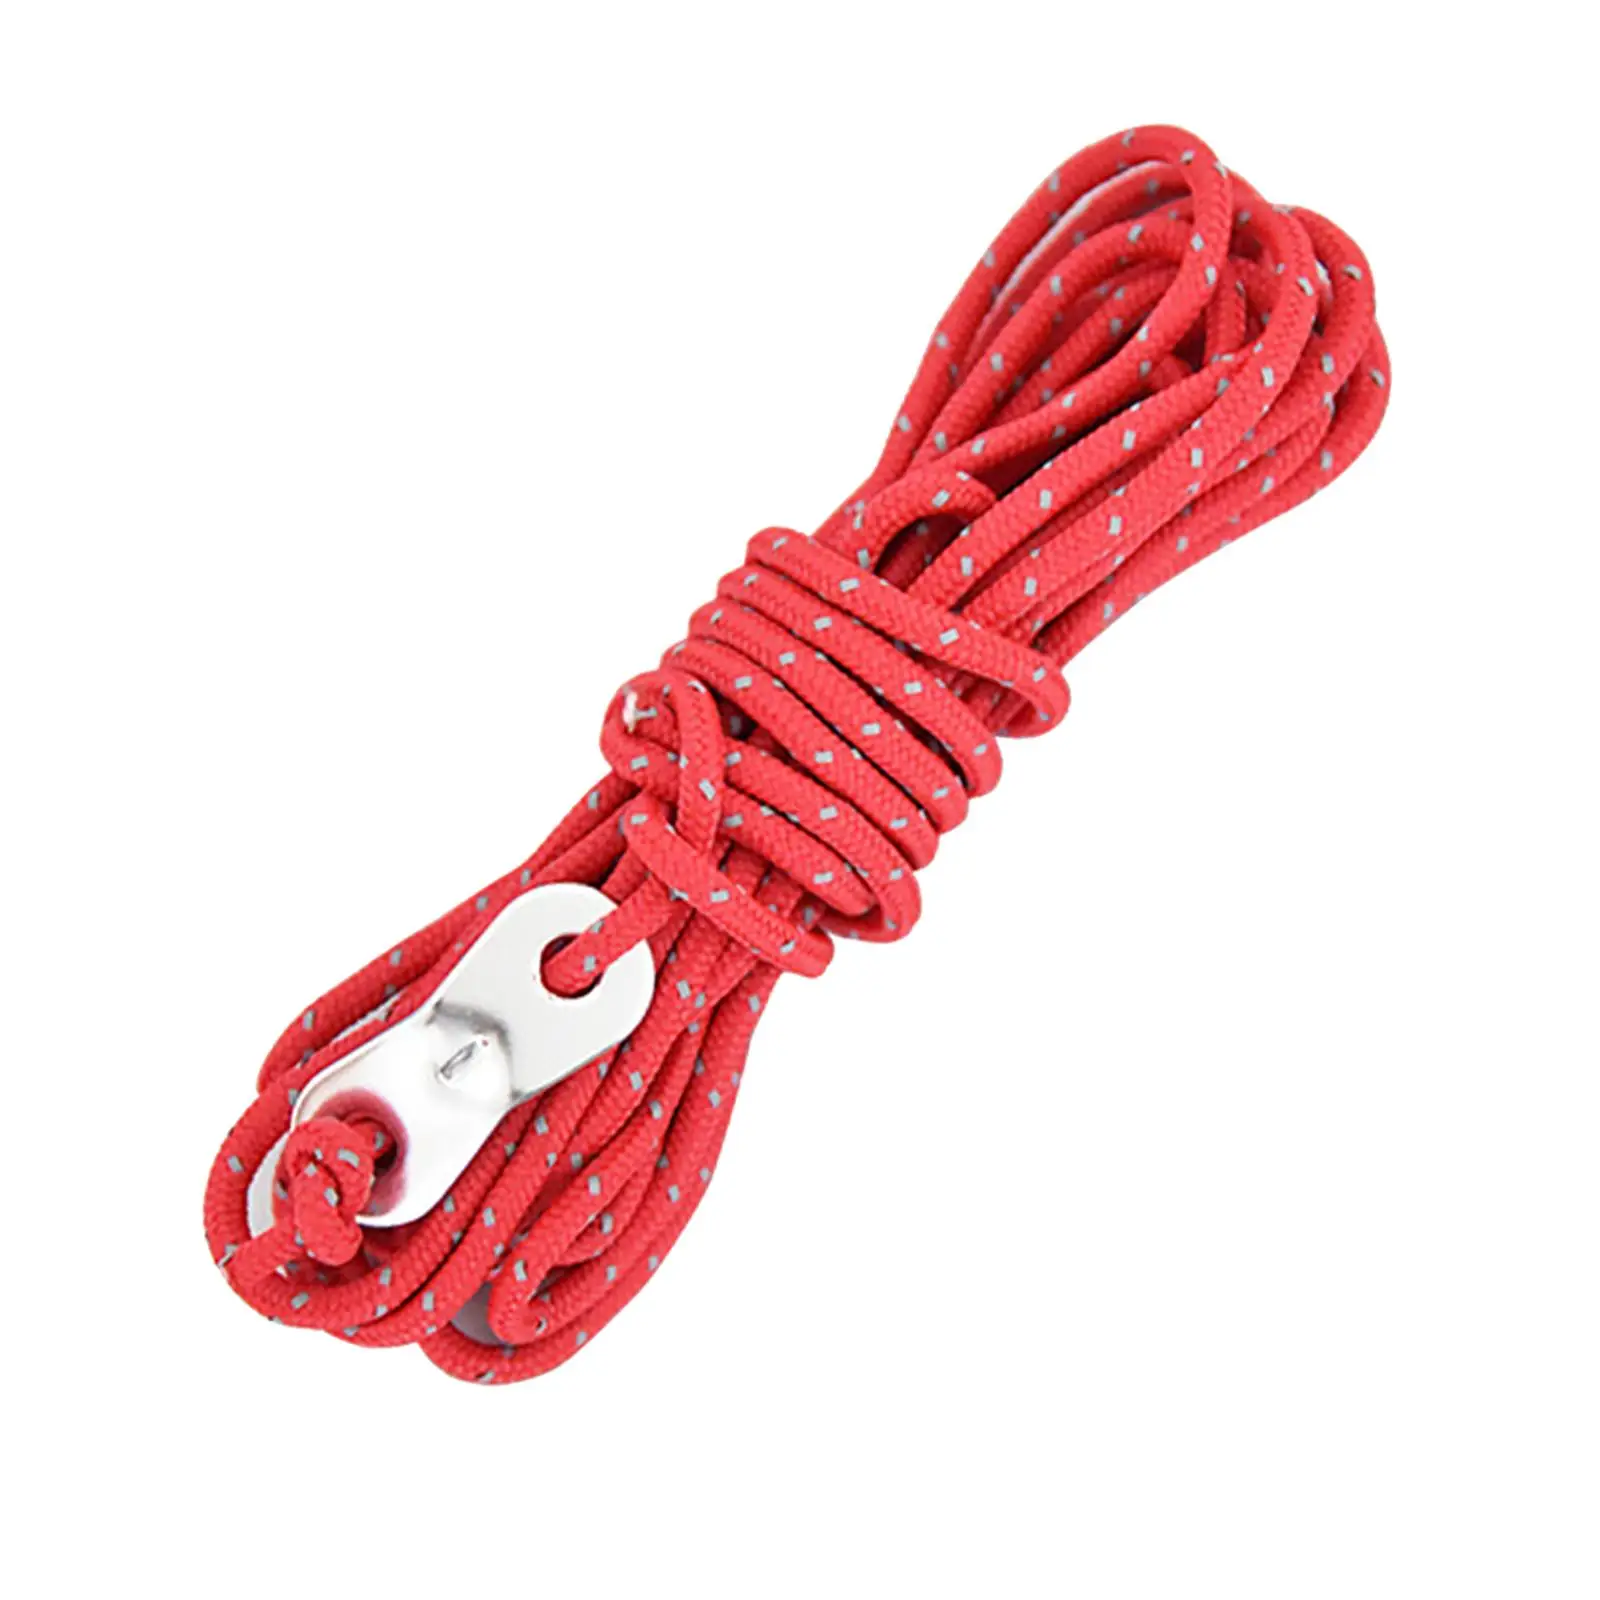 2x Windproof Wind Rope with Adjustment Buckle Accs for Camping Tent Activity